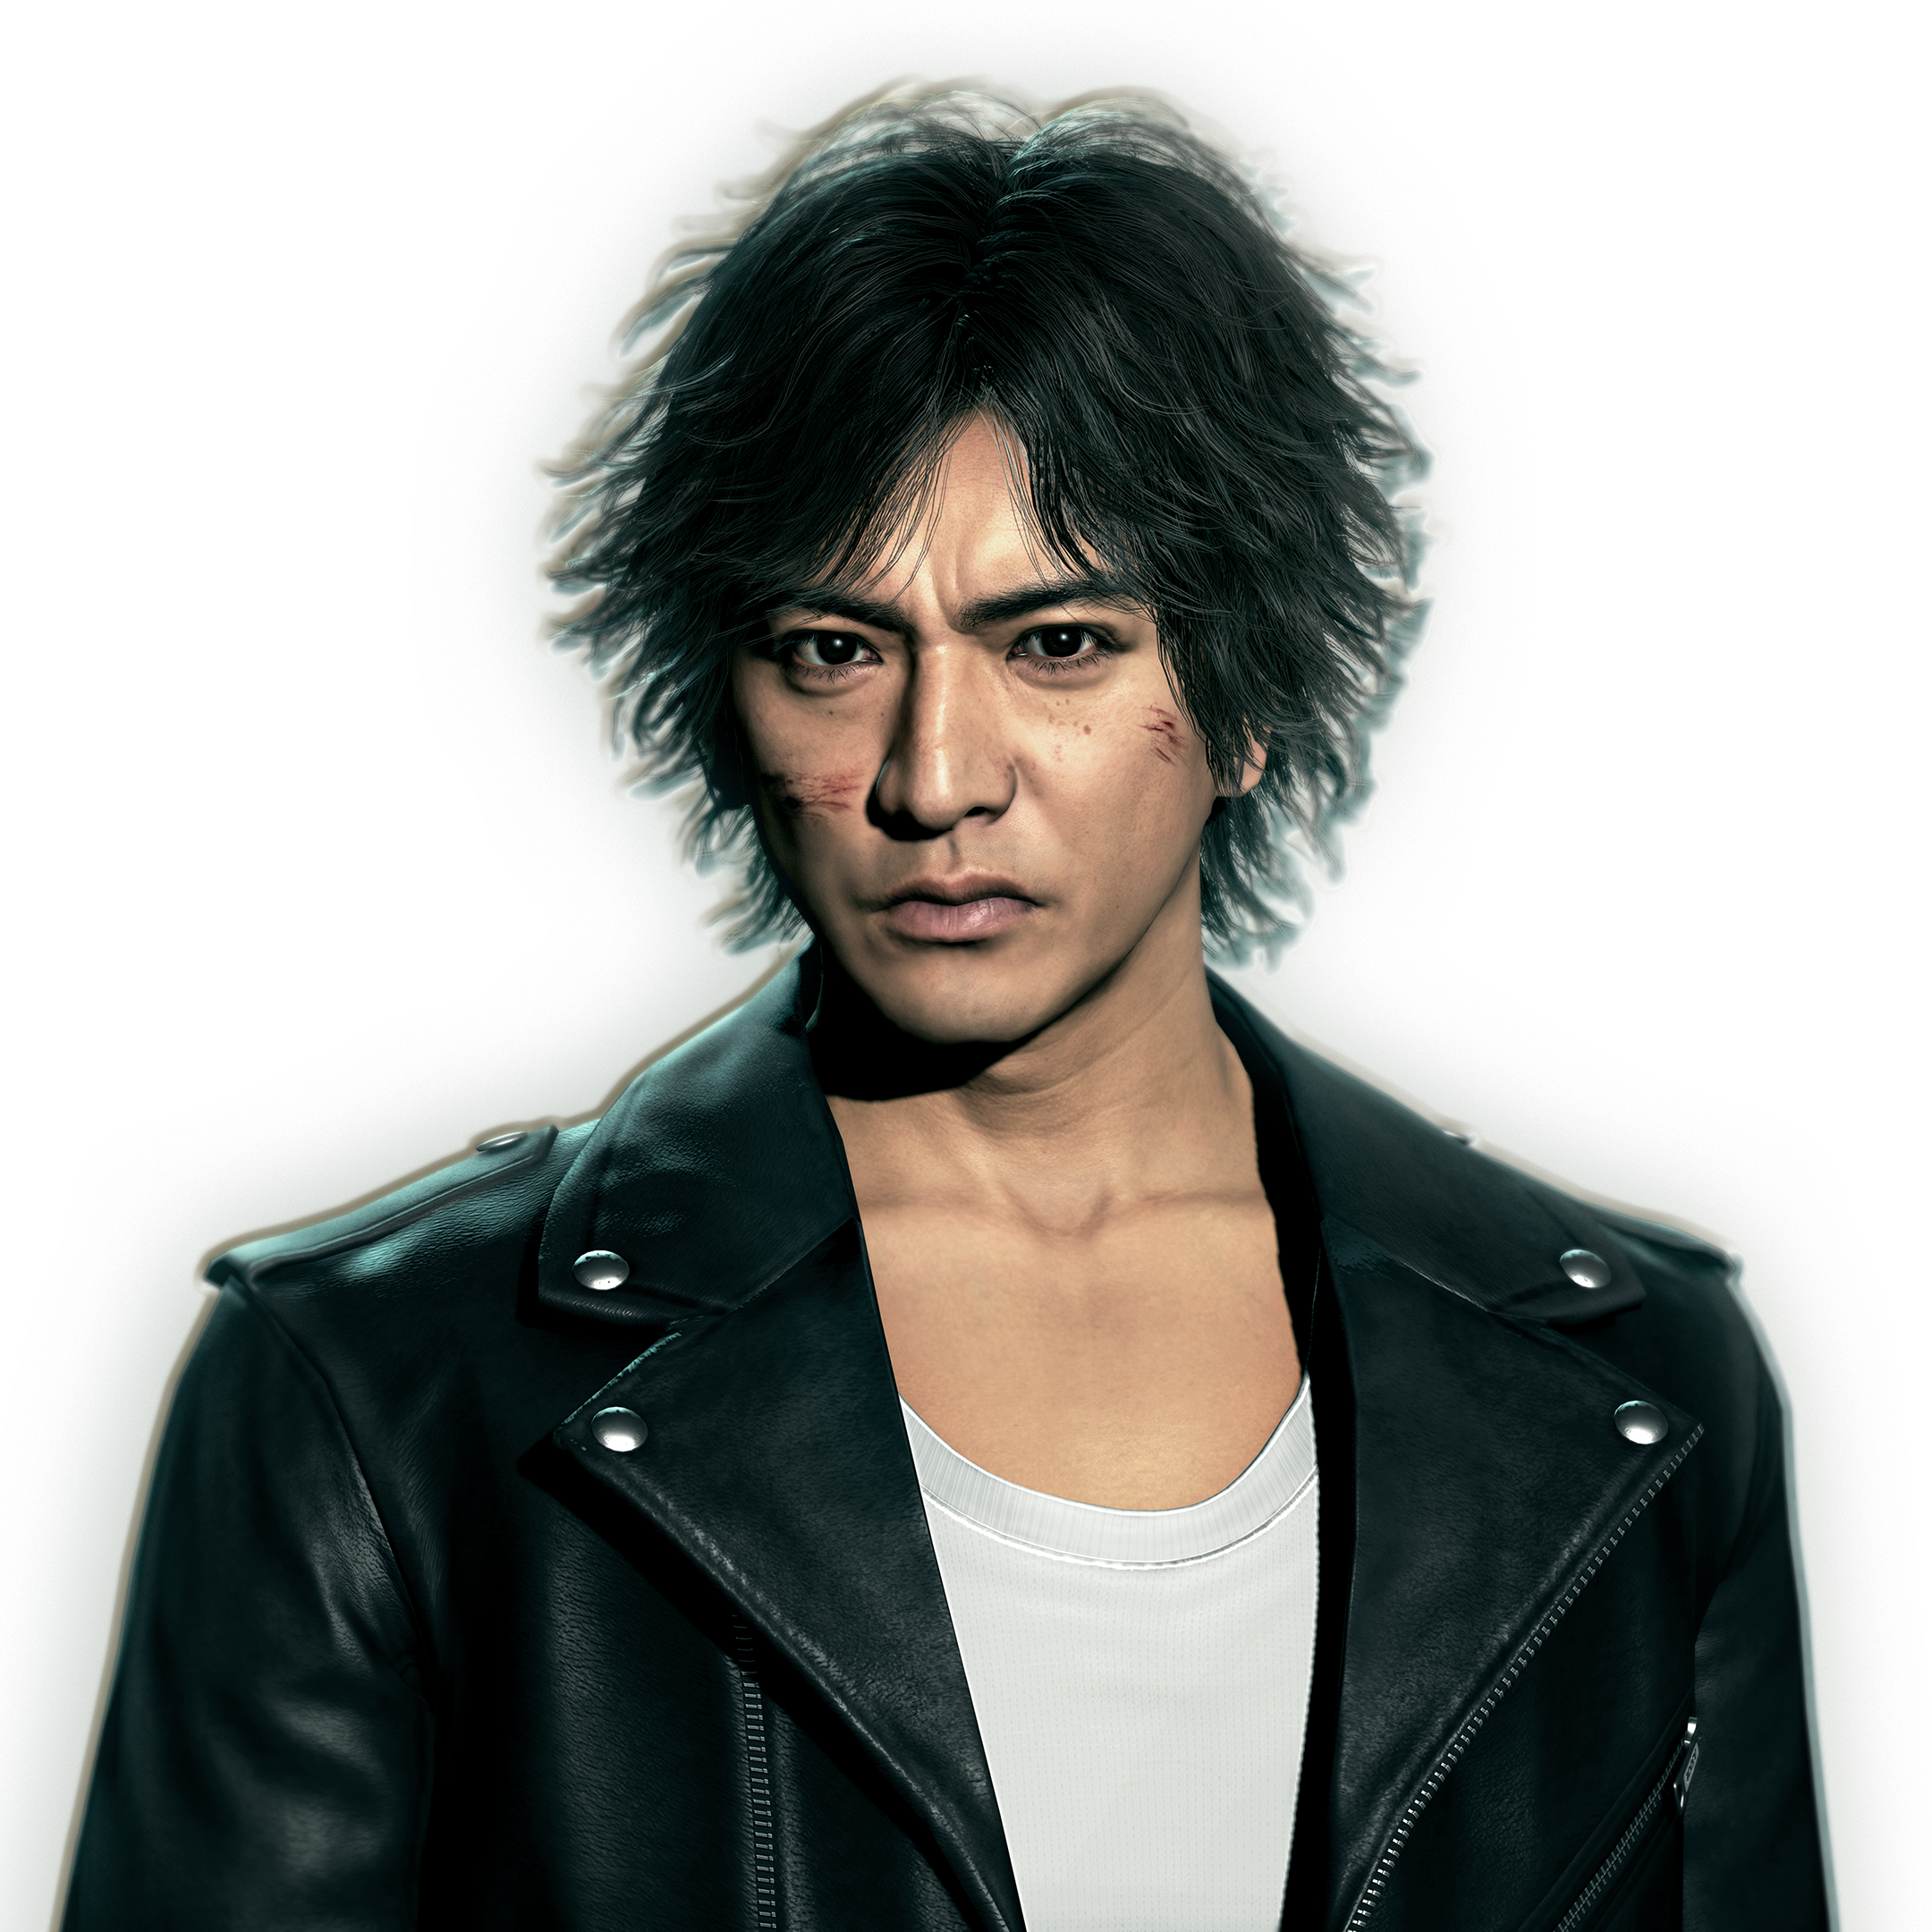 judgment ps4 store